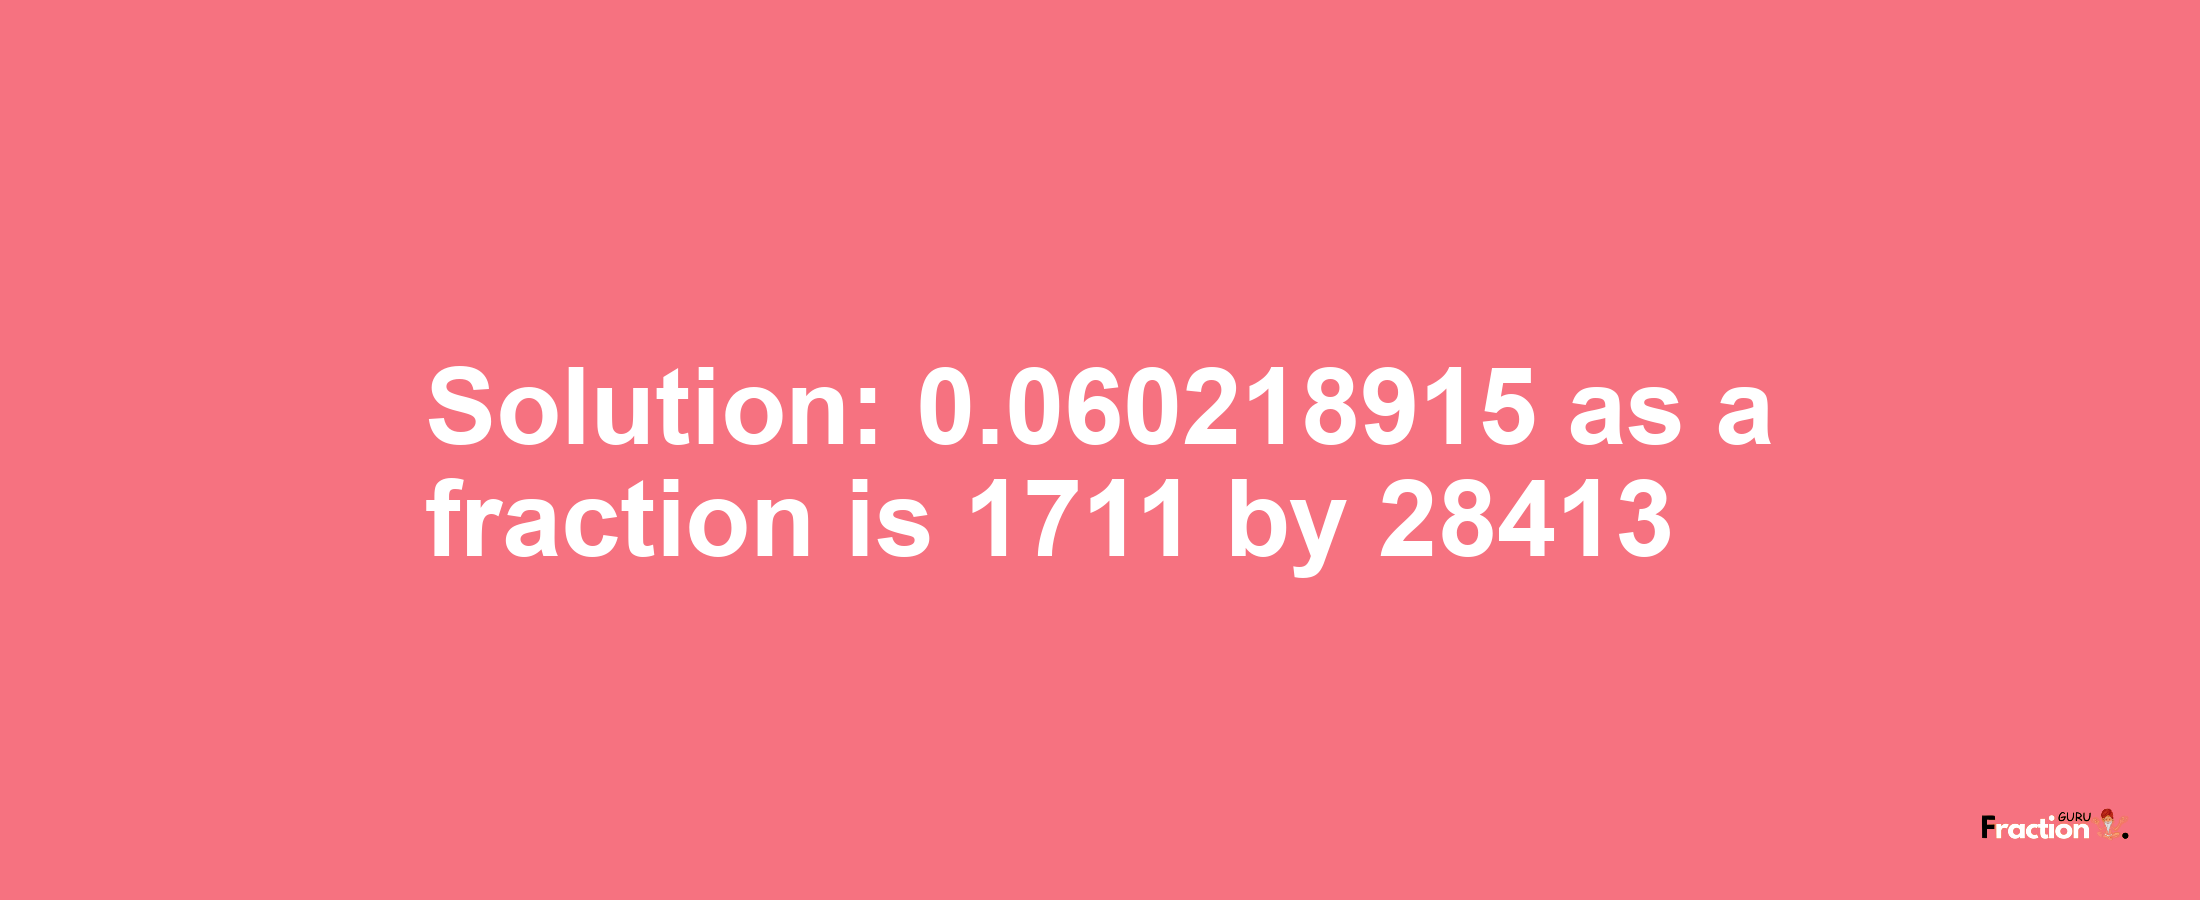 Solution:0.060218915 as a fraction is 1711/28413